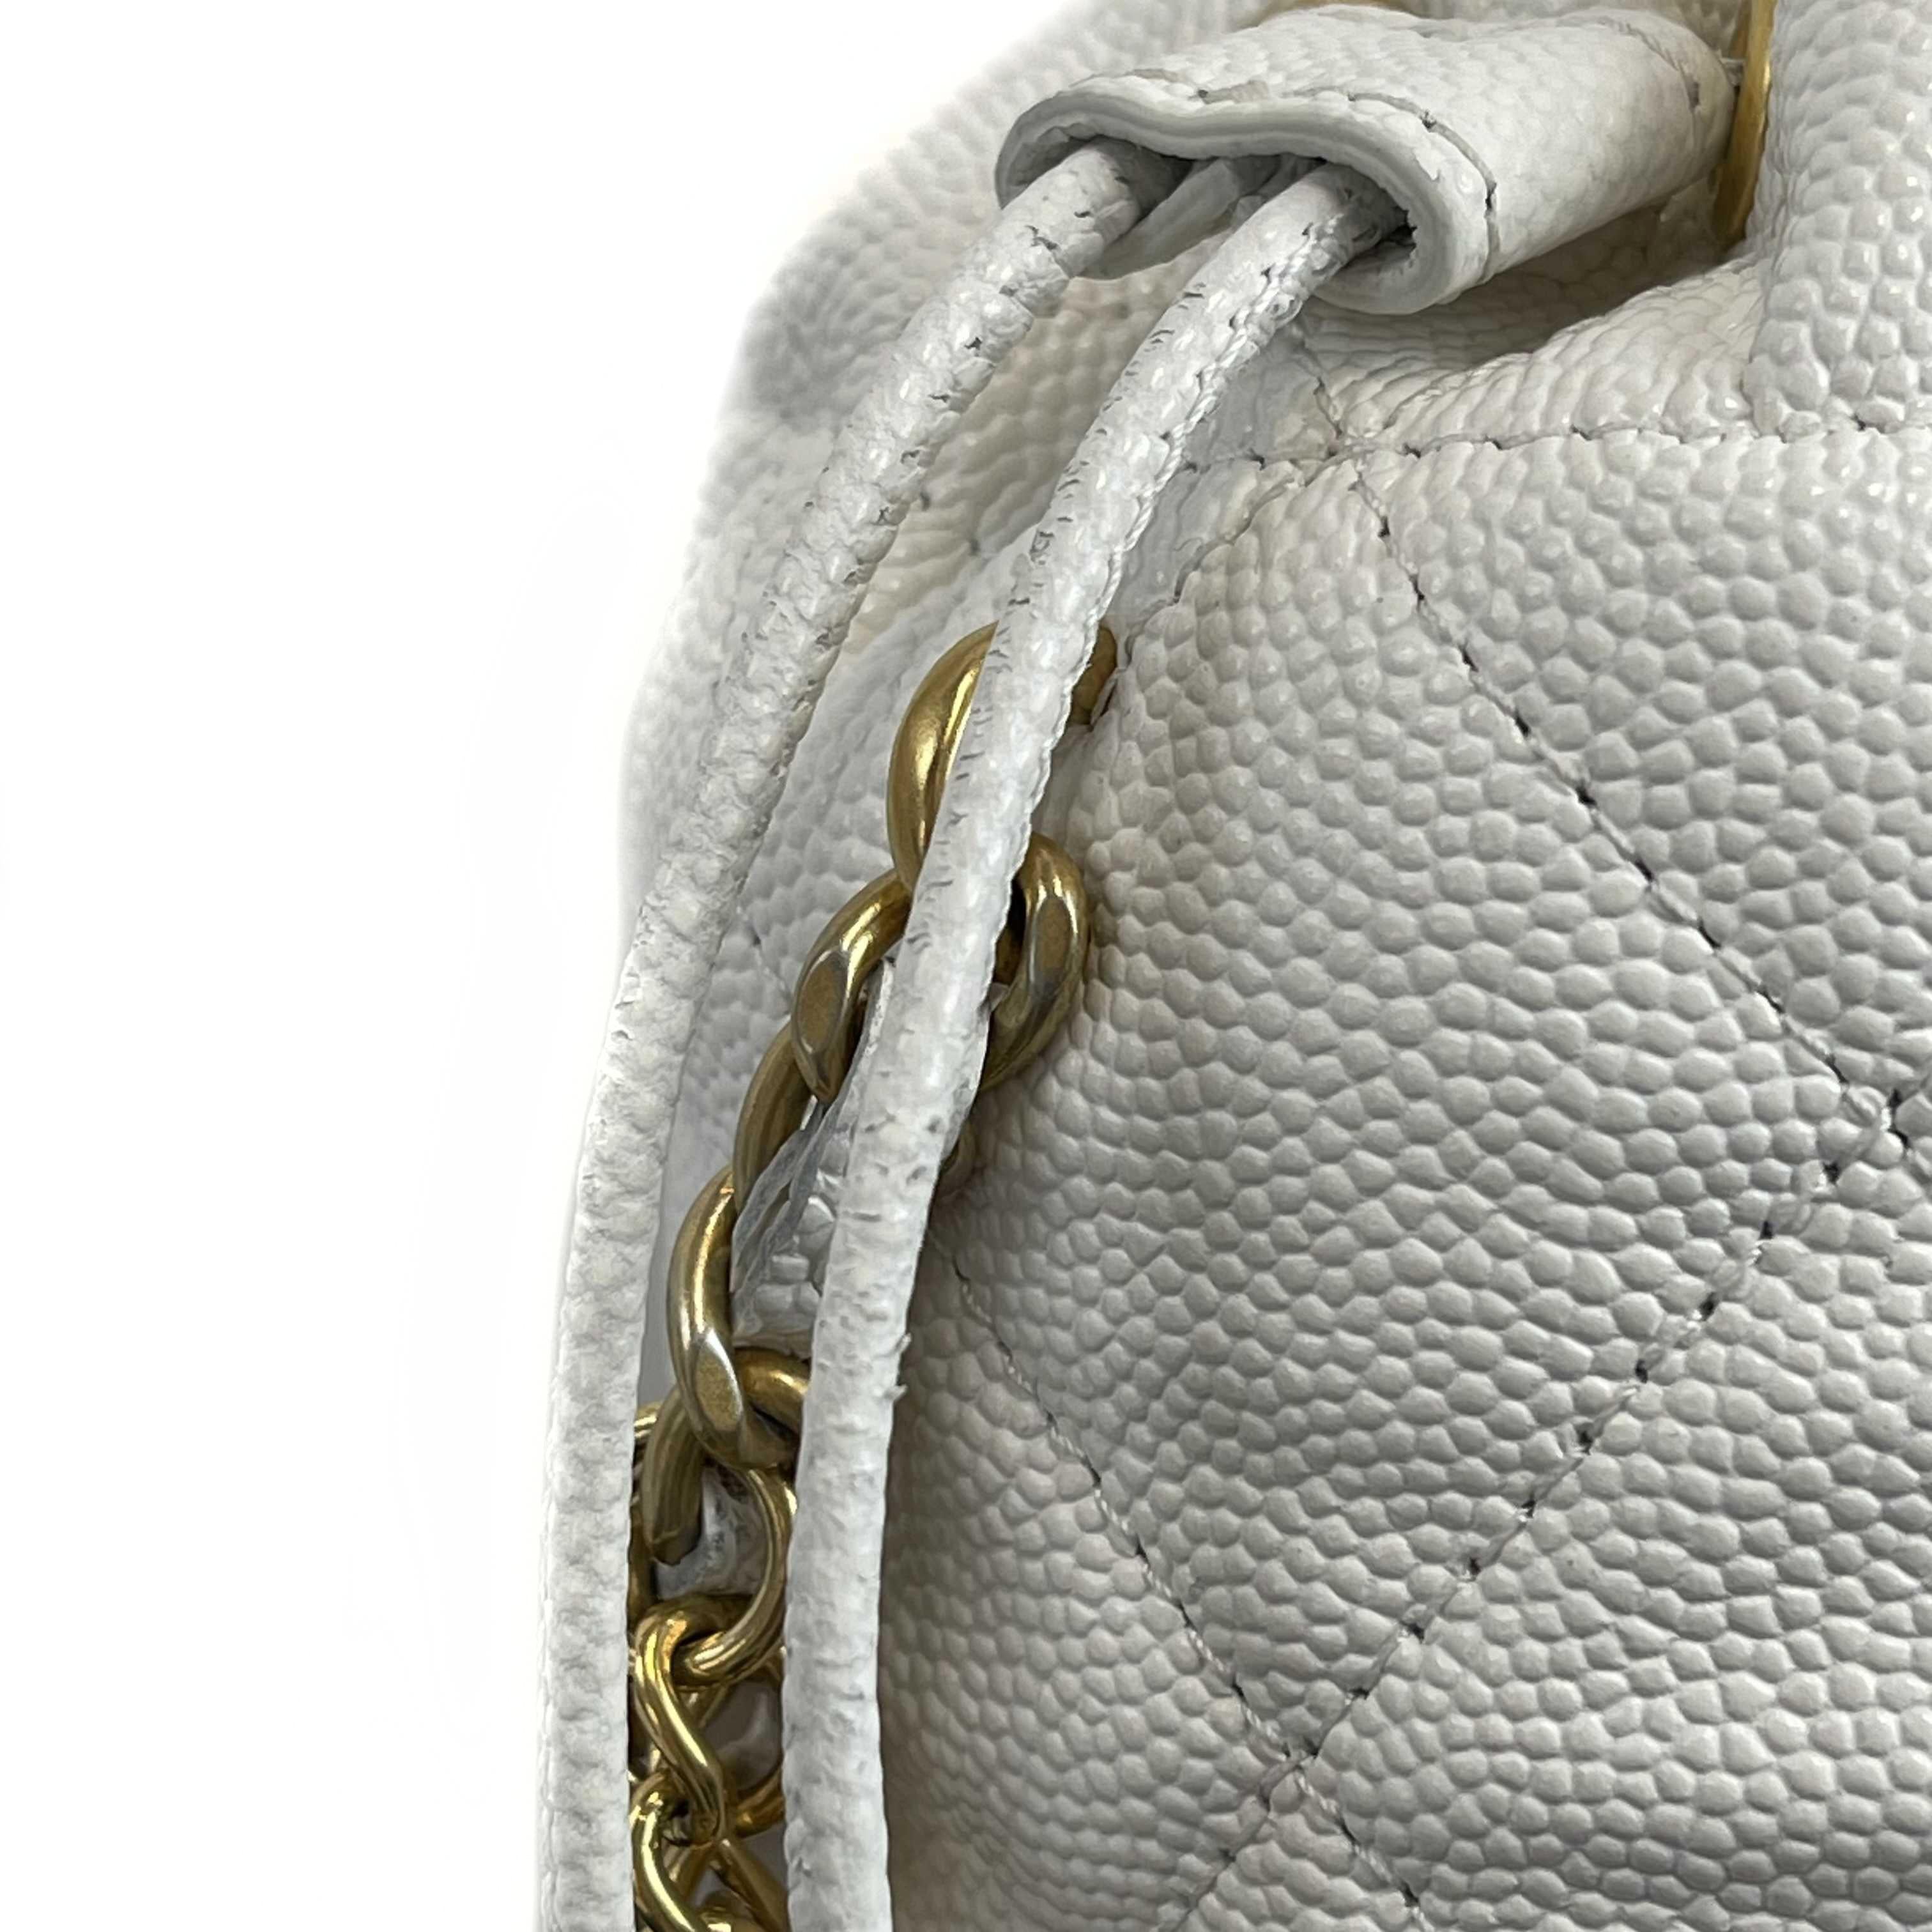 CHANEL - NEW Mini Bucket Bag - White Caviar Leather / Gold 10 Coins CC Crossbody For Sale 11